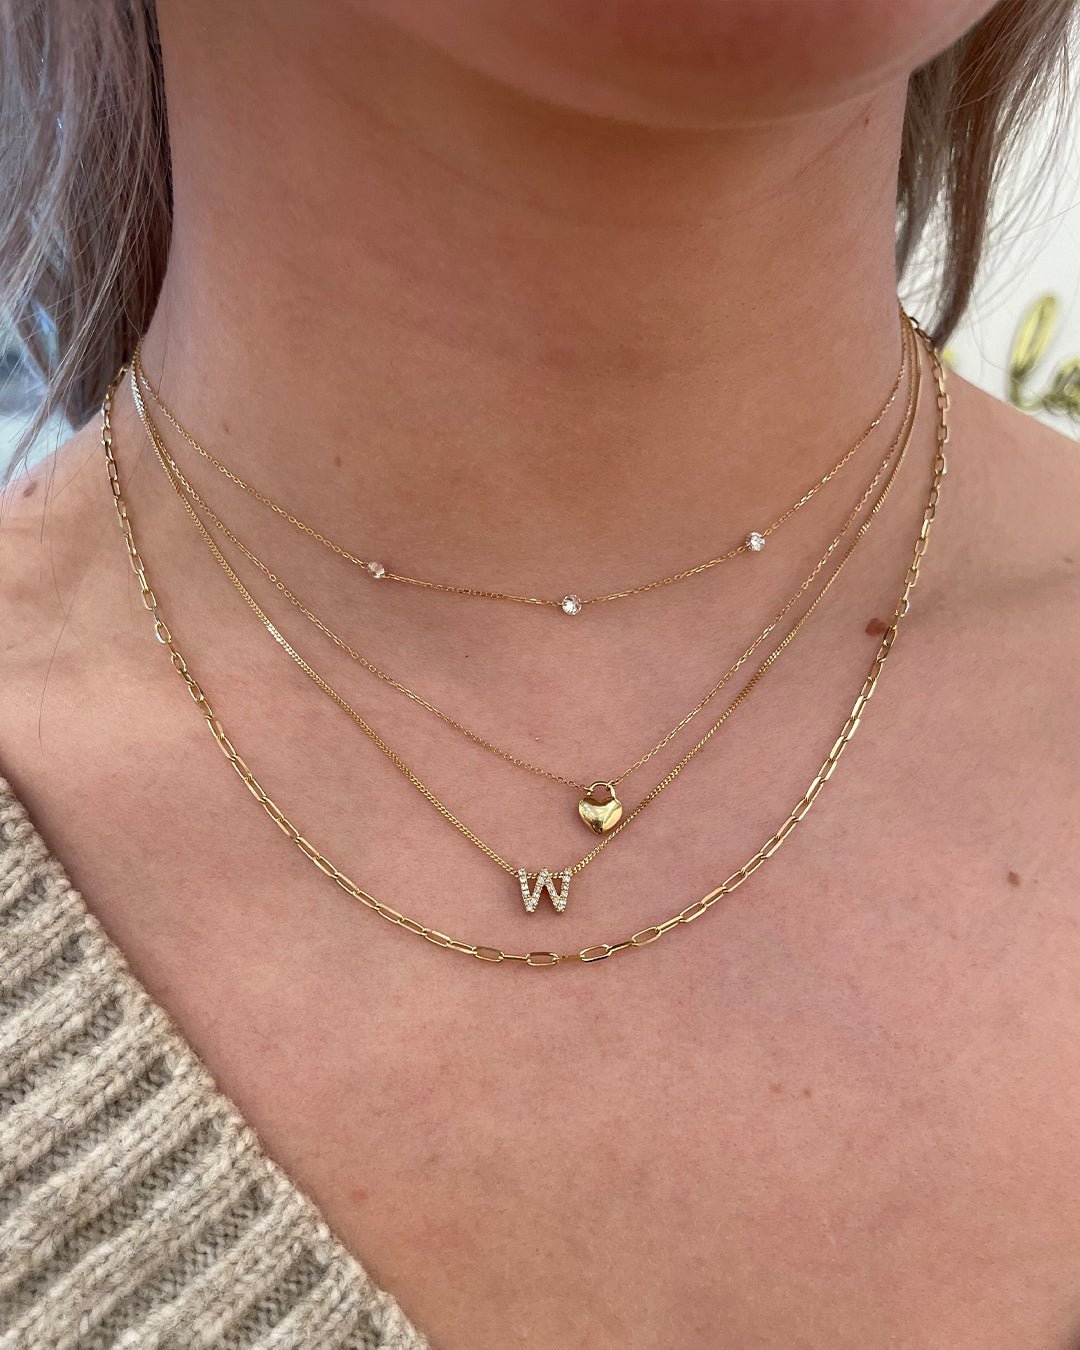 Woman wearing 14k gold necklaces